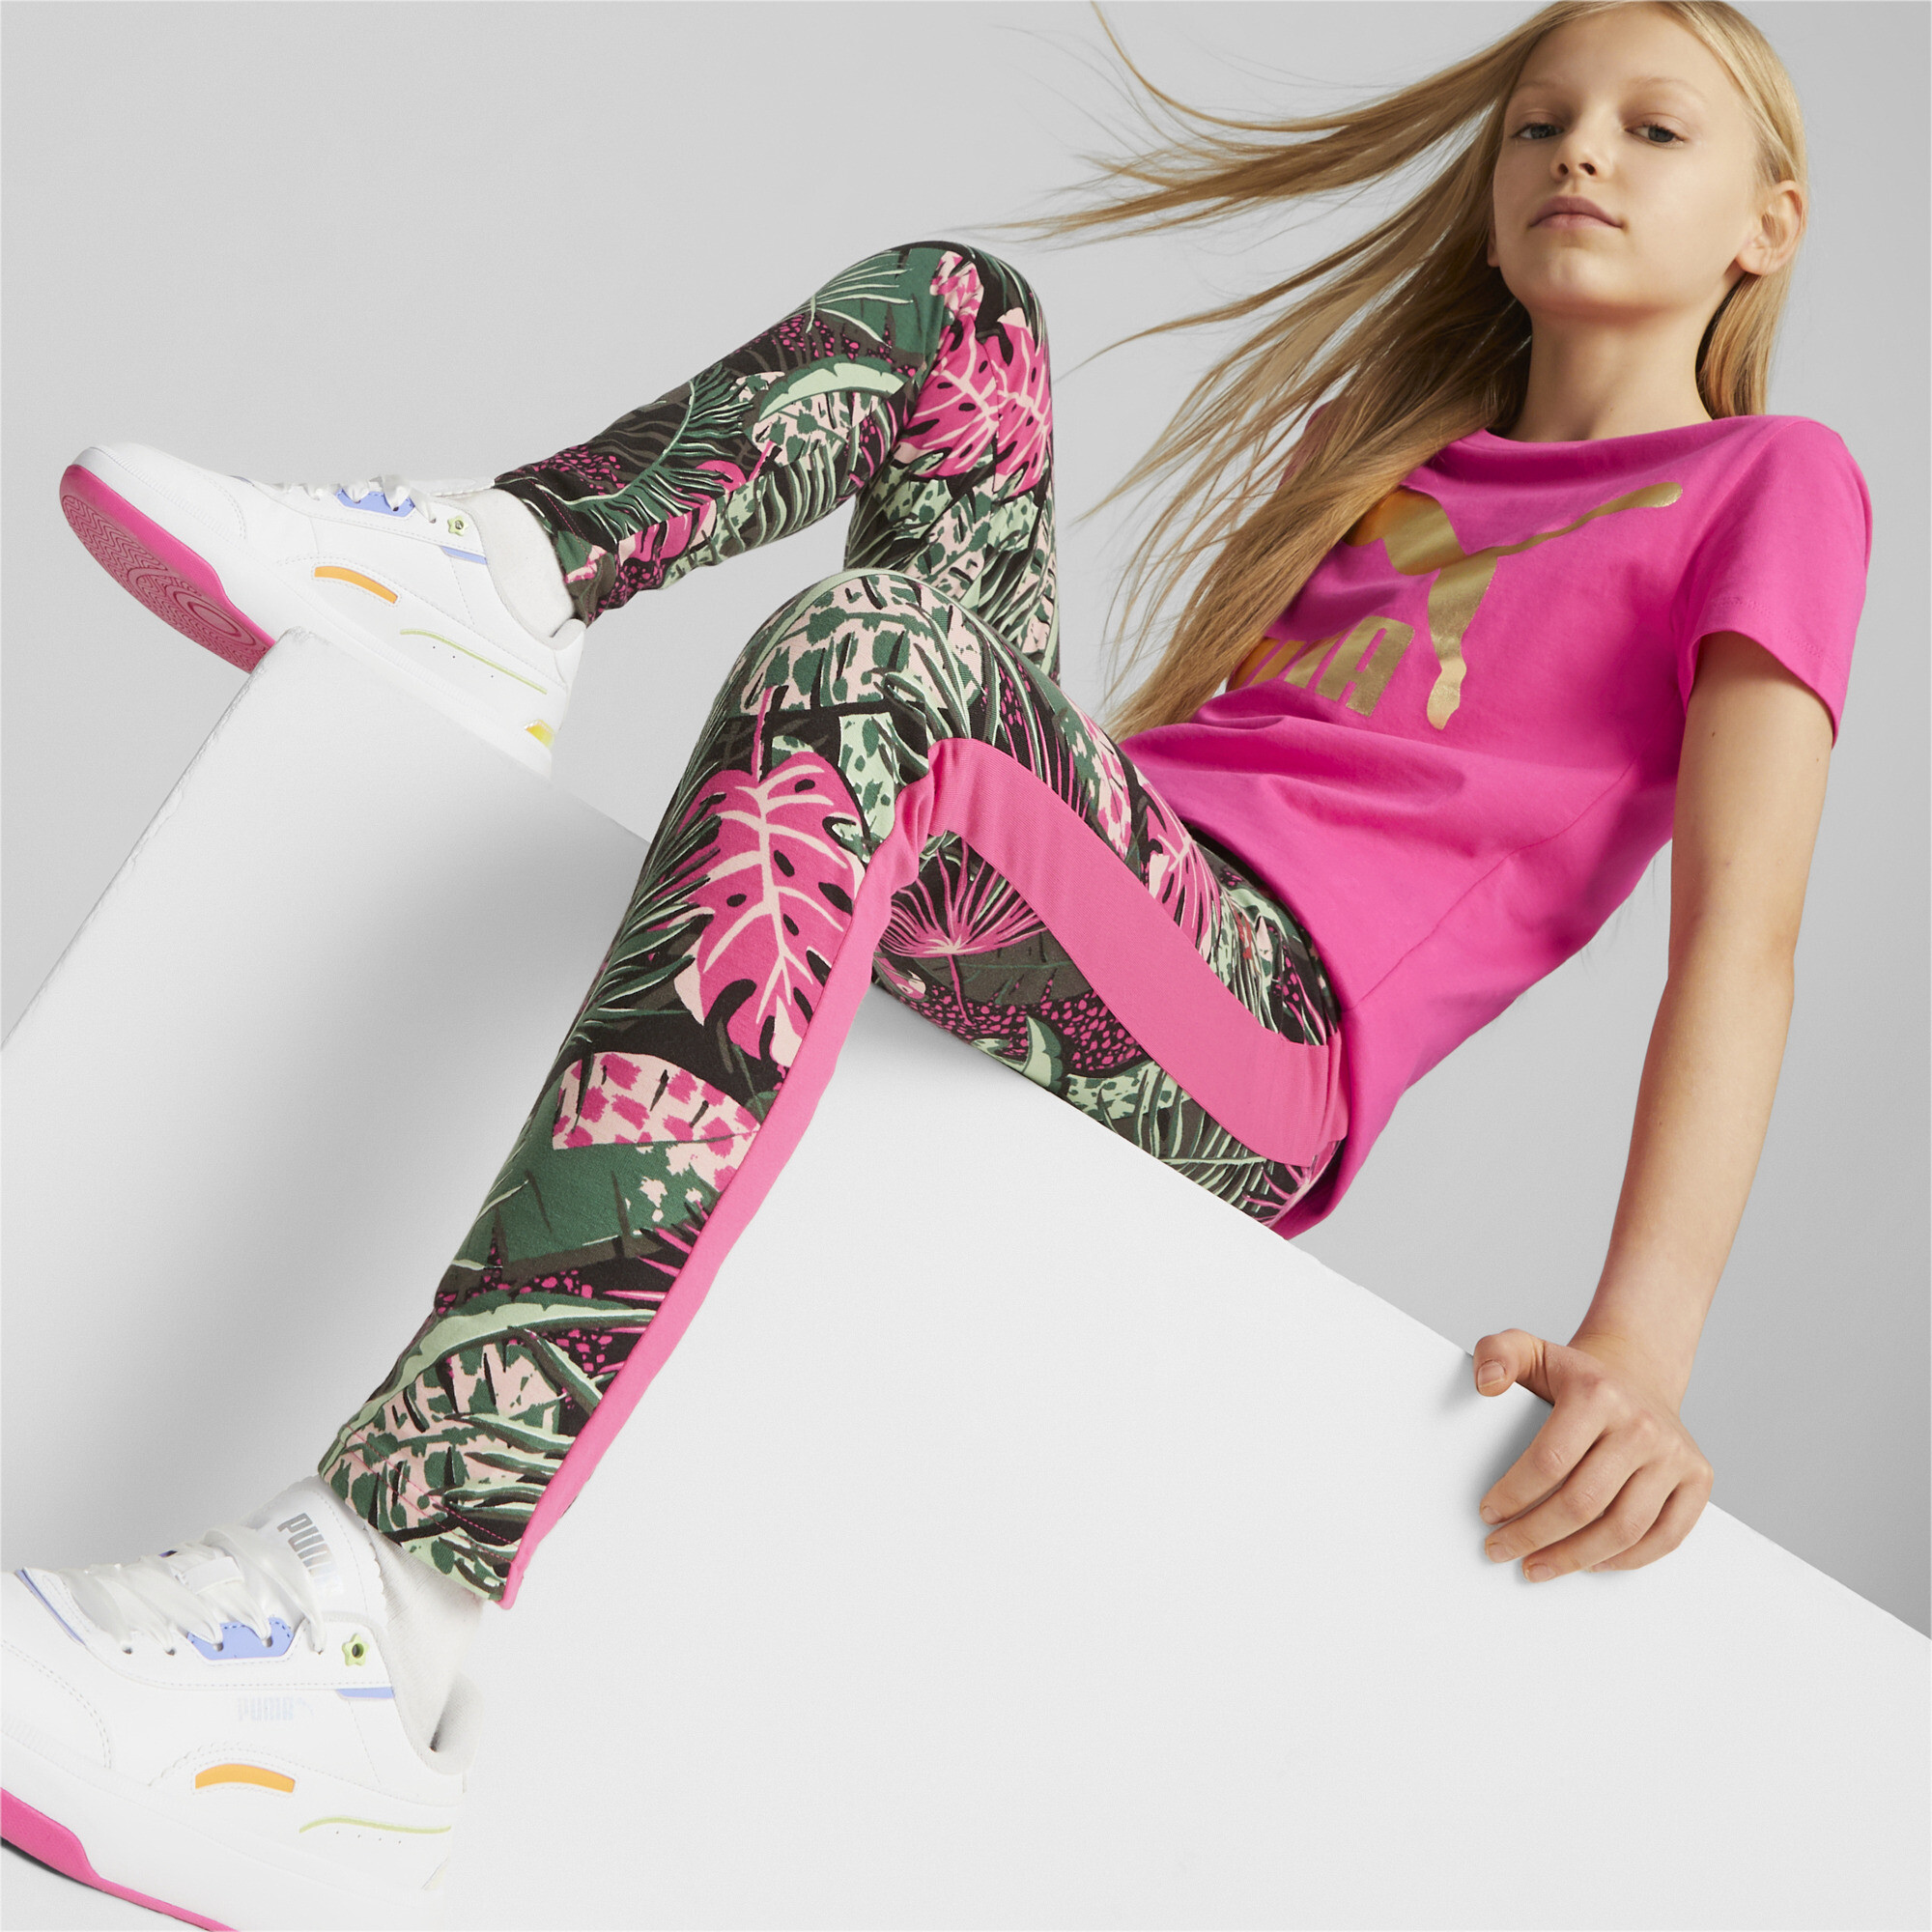 PUMA T7 Vacay Queen Printed Leggings In Pink, Size 7-8 Youth